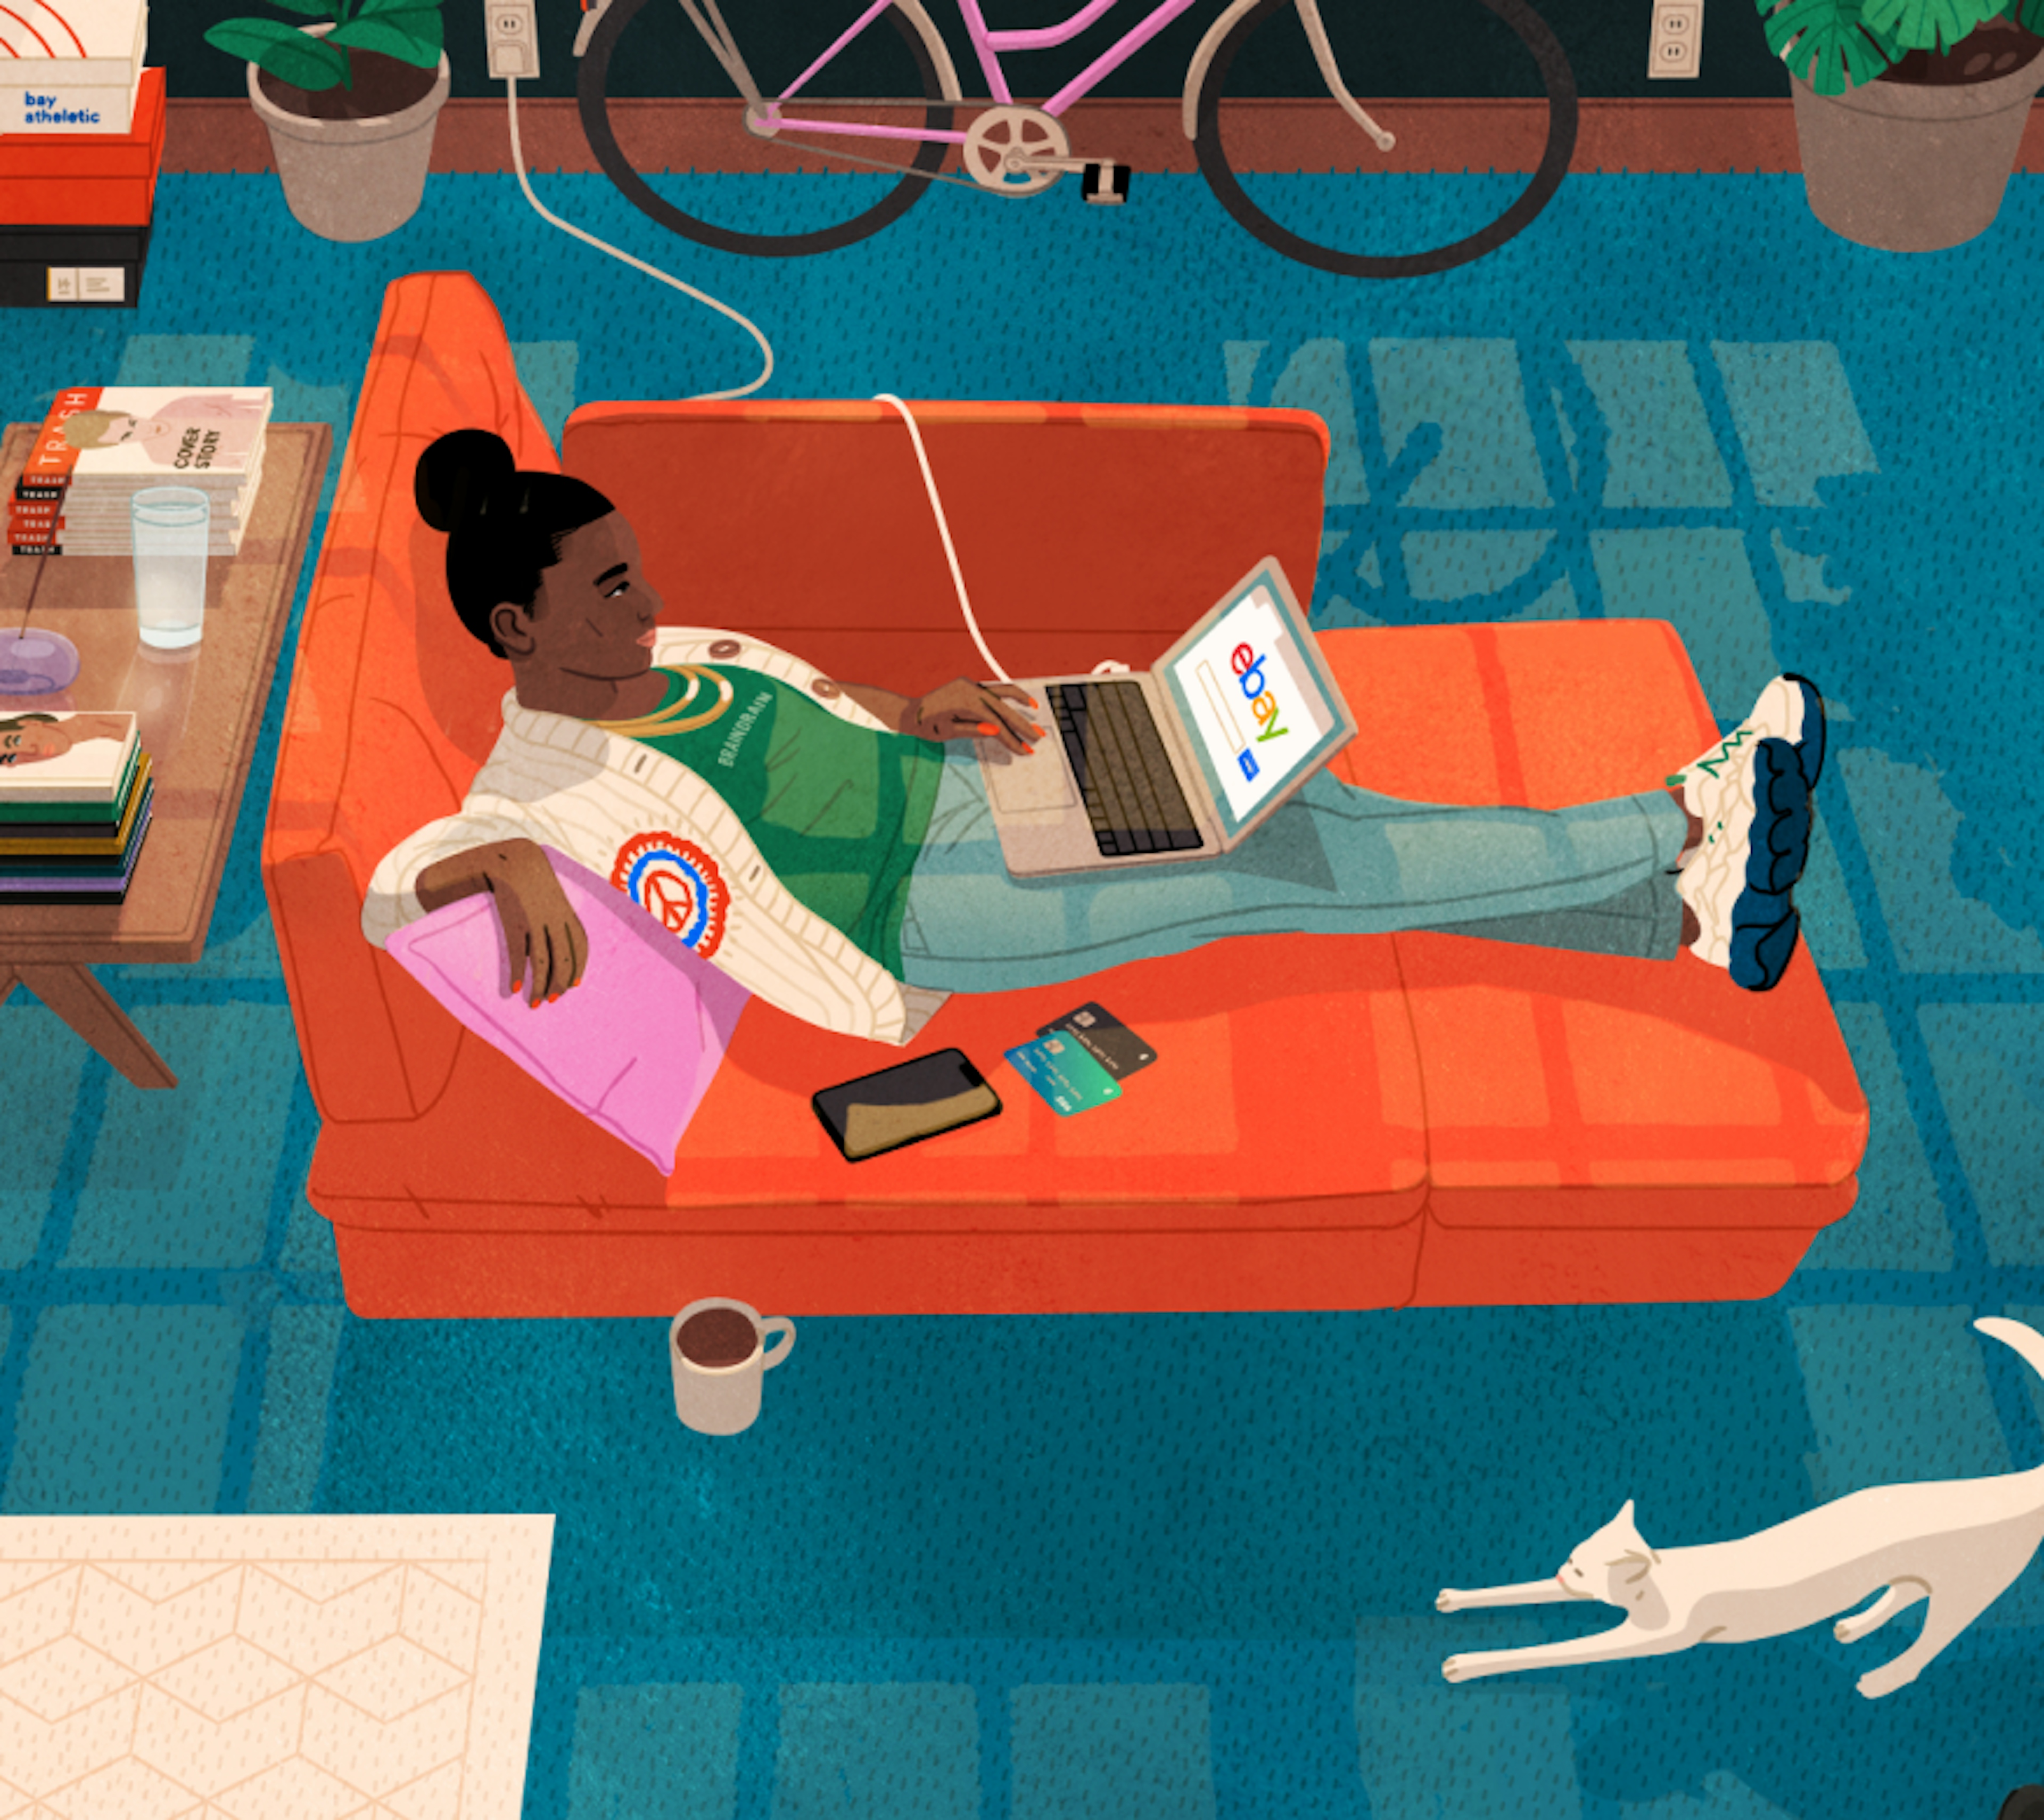 A person is lying on an orange sofa, using a laptop displaying the eBay website. The room includes a bicycle, plants, a white cat stretching on the floor, and a coffee table with books and a drink. There are shoe boxes in the corner and a poster on the wall in the background.